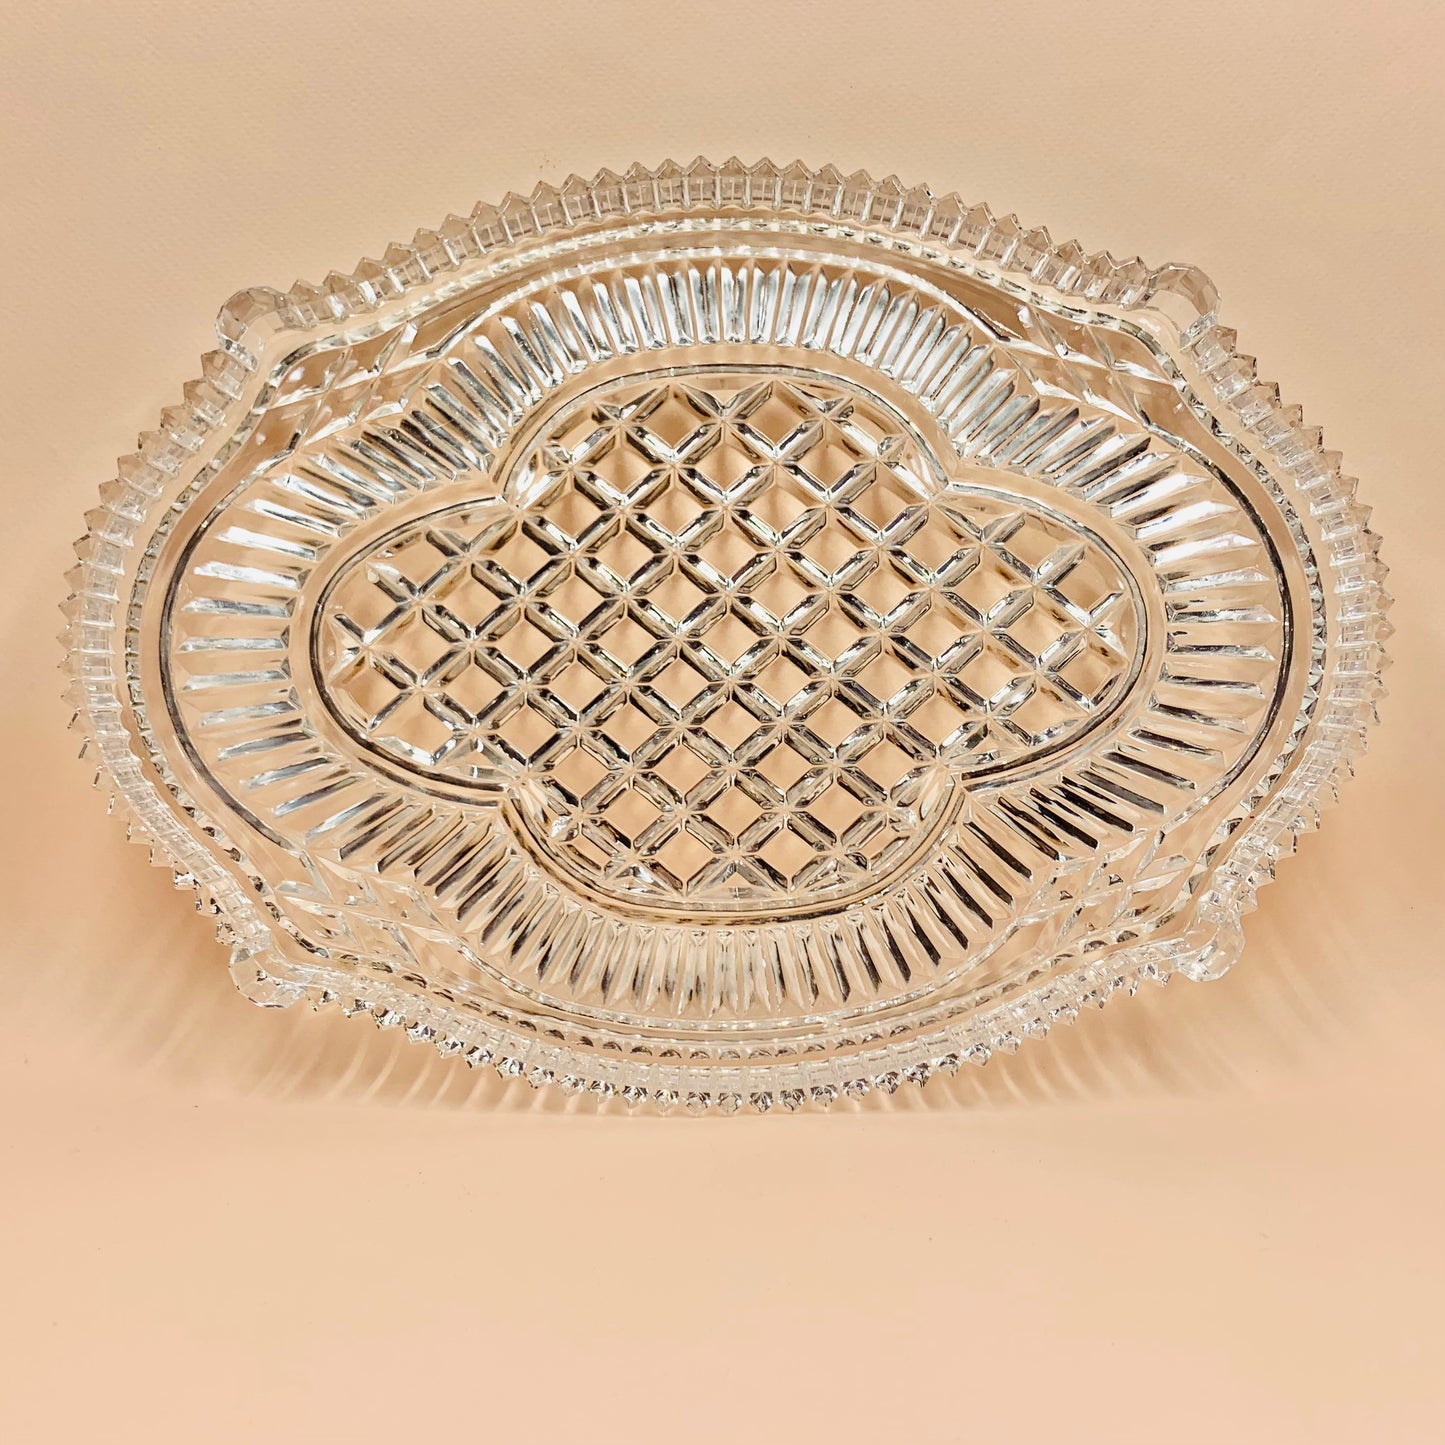 Antique hand cut diamond pattern crystal serving tray